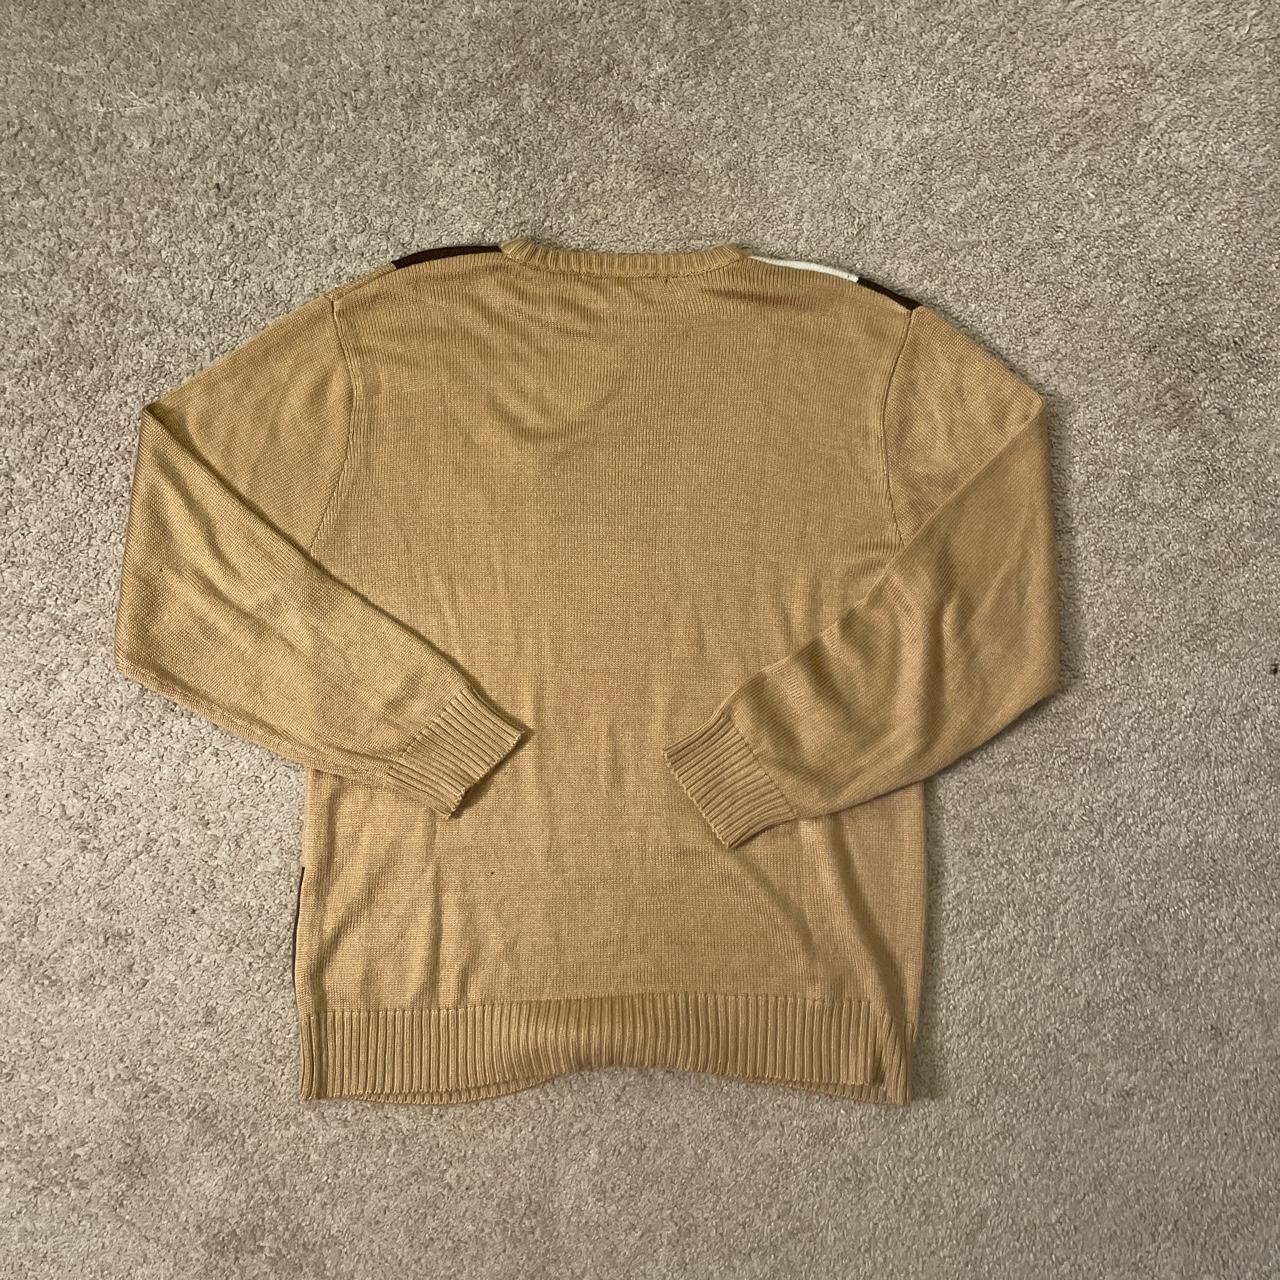 Union Bay Men's Tan and Brown Jumper (2)